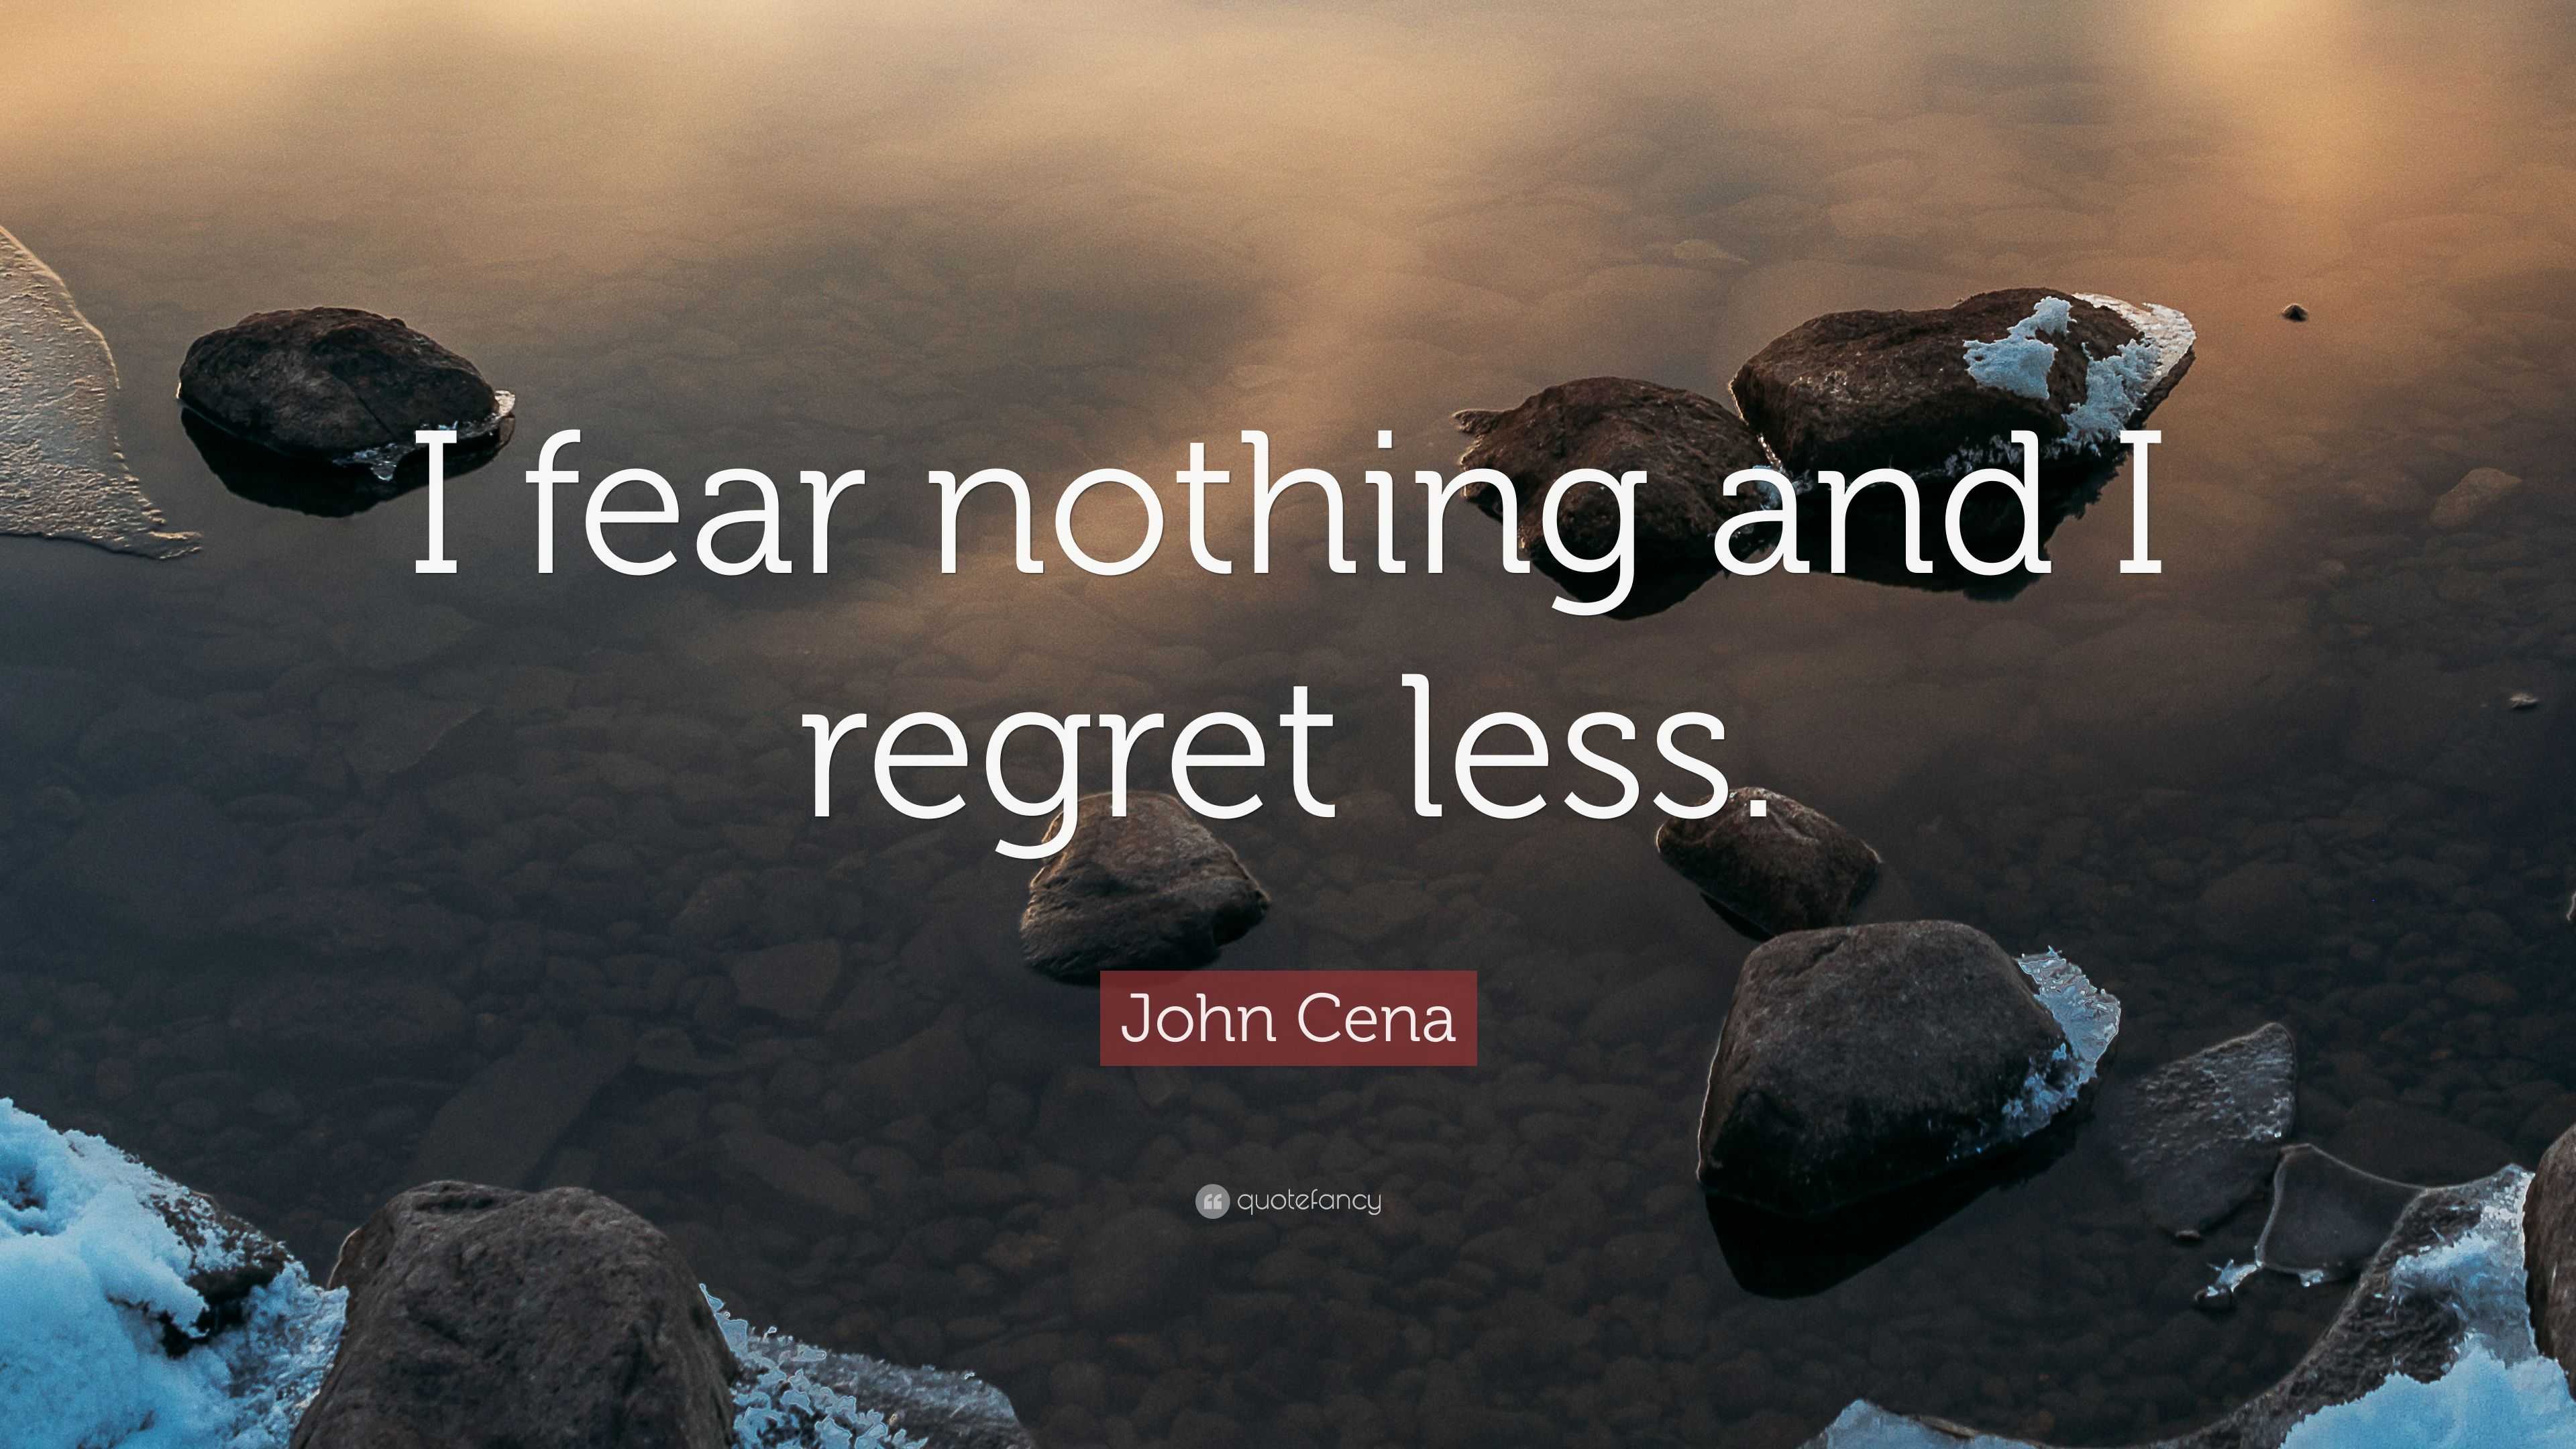 John Cena Quote: "I fear nothing and I regret less." (9 ...